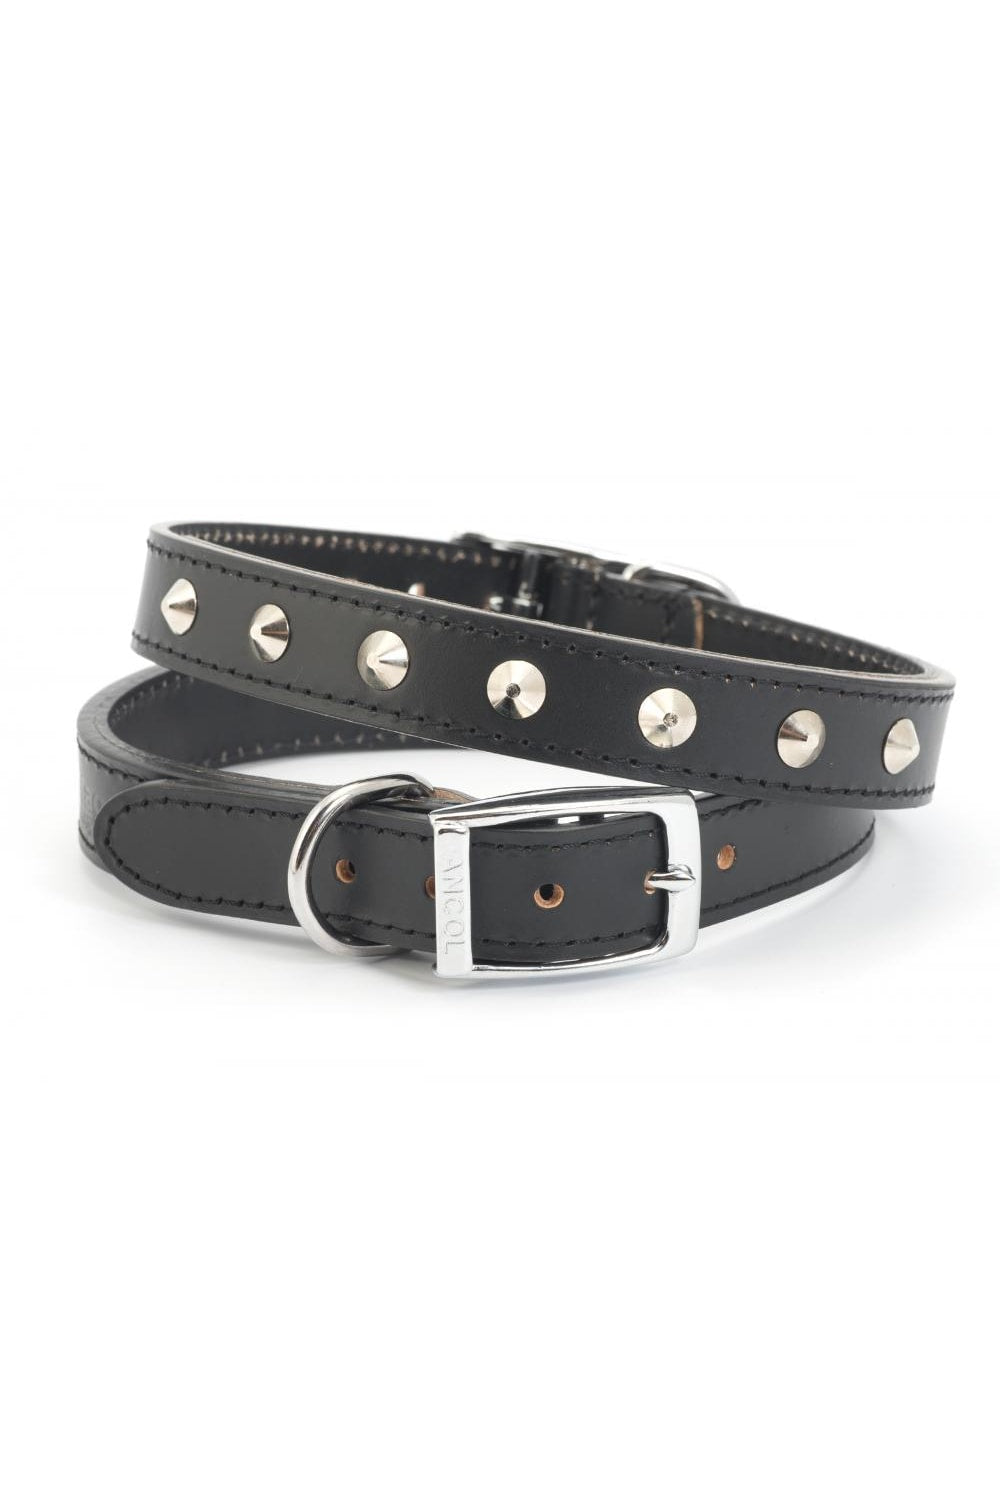 Ancol Leather Studded Dog Collar (Black) (20 Inch)